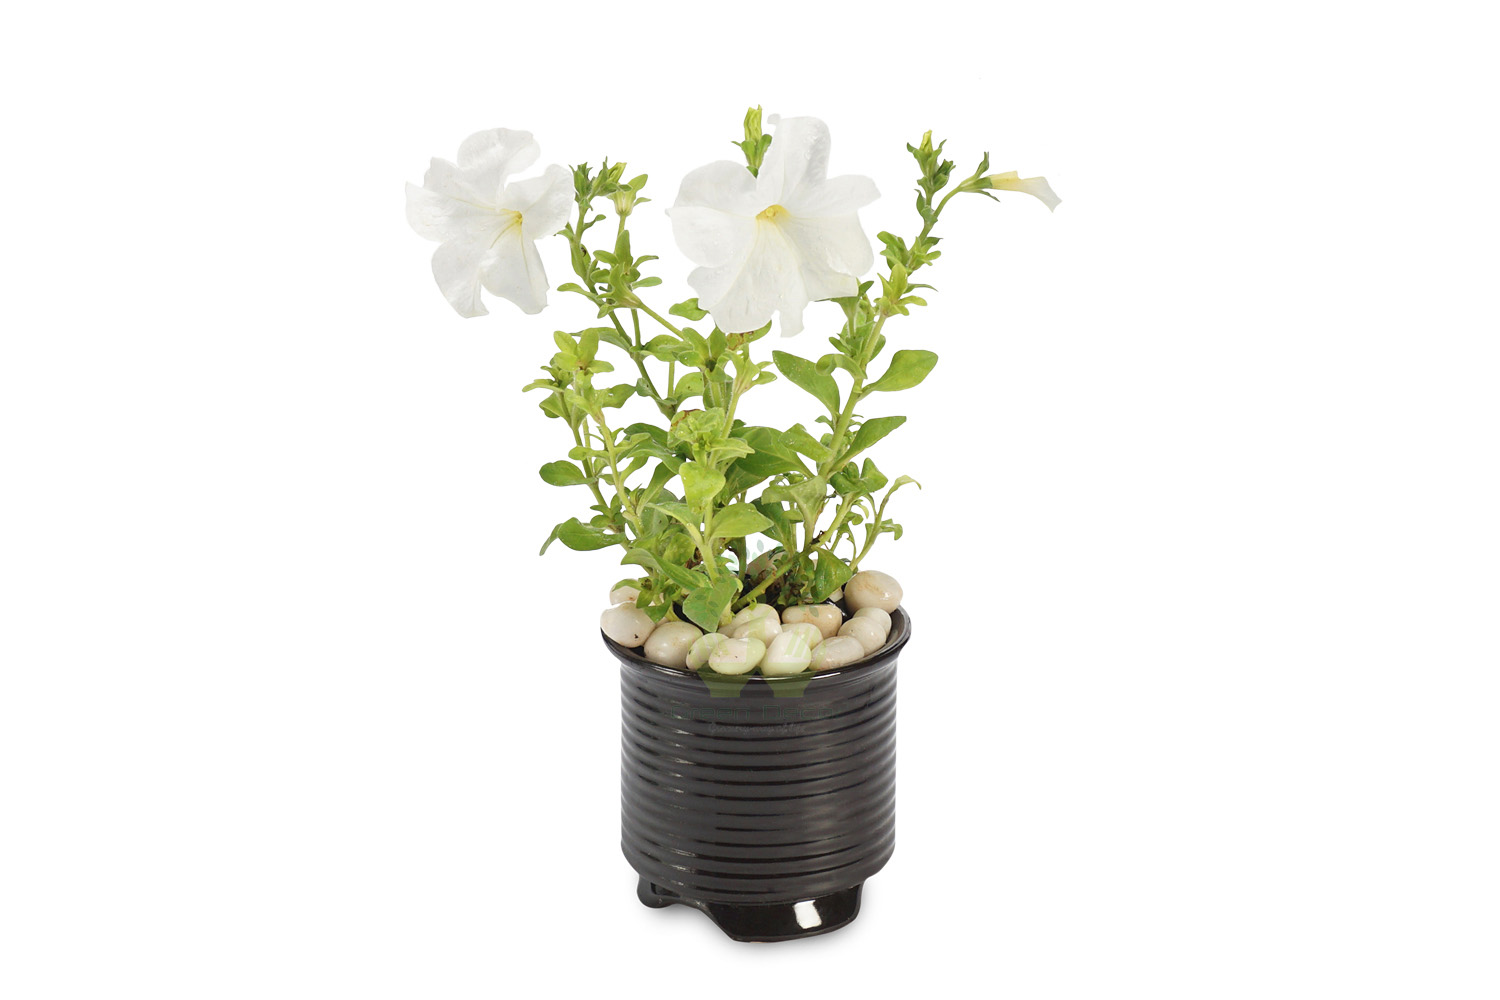 Buy Petunia White Plant Front View, White Pots and Seeds in Delhi NCR by the best online nursery shop Greendecor.